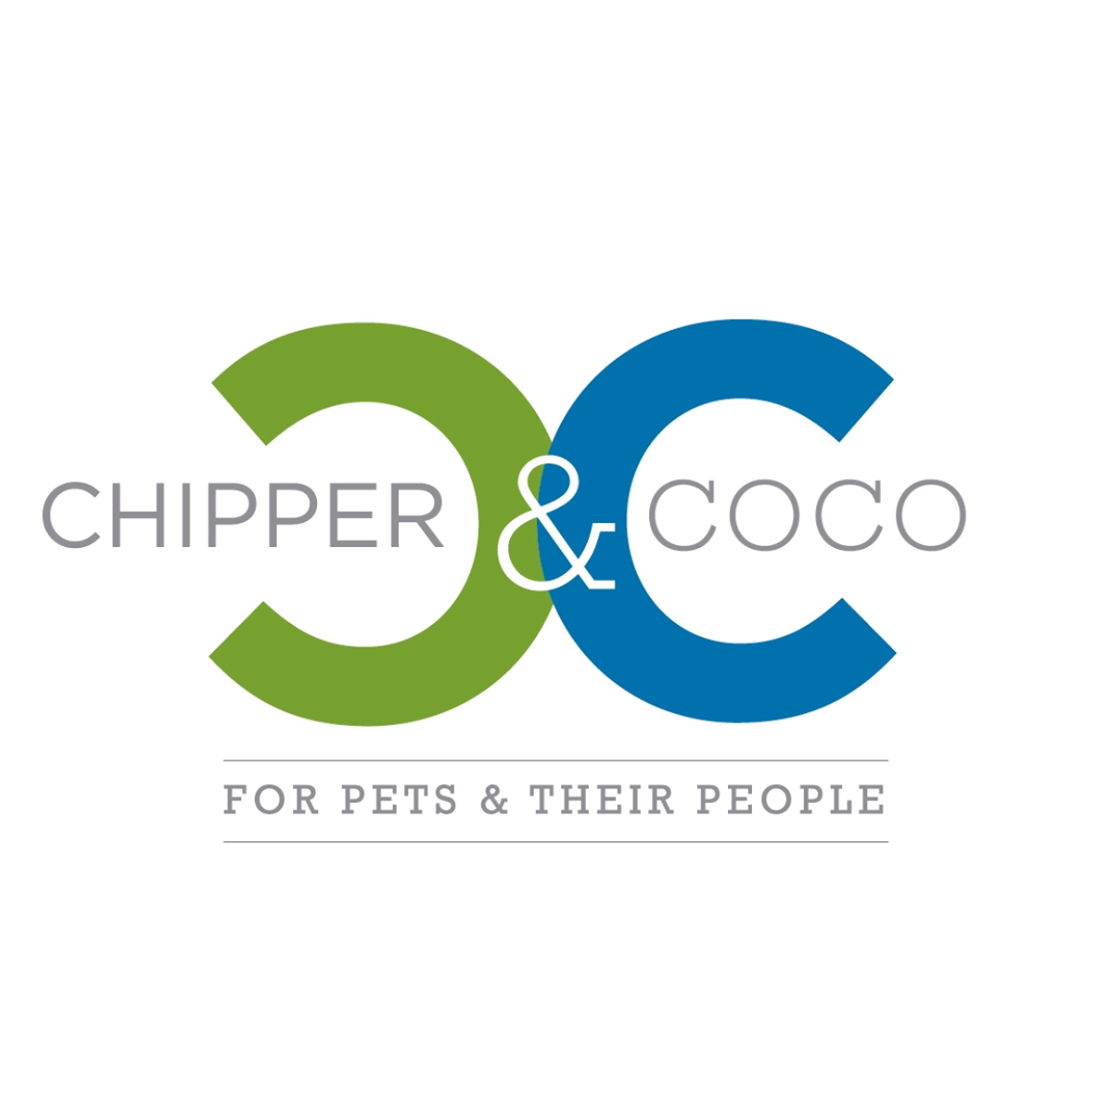 Company logo of Chipper and Coco